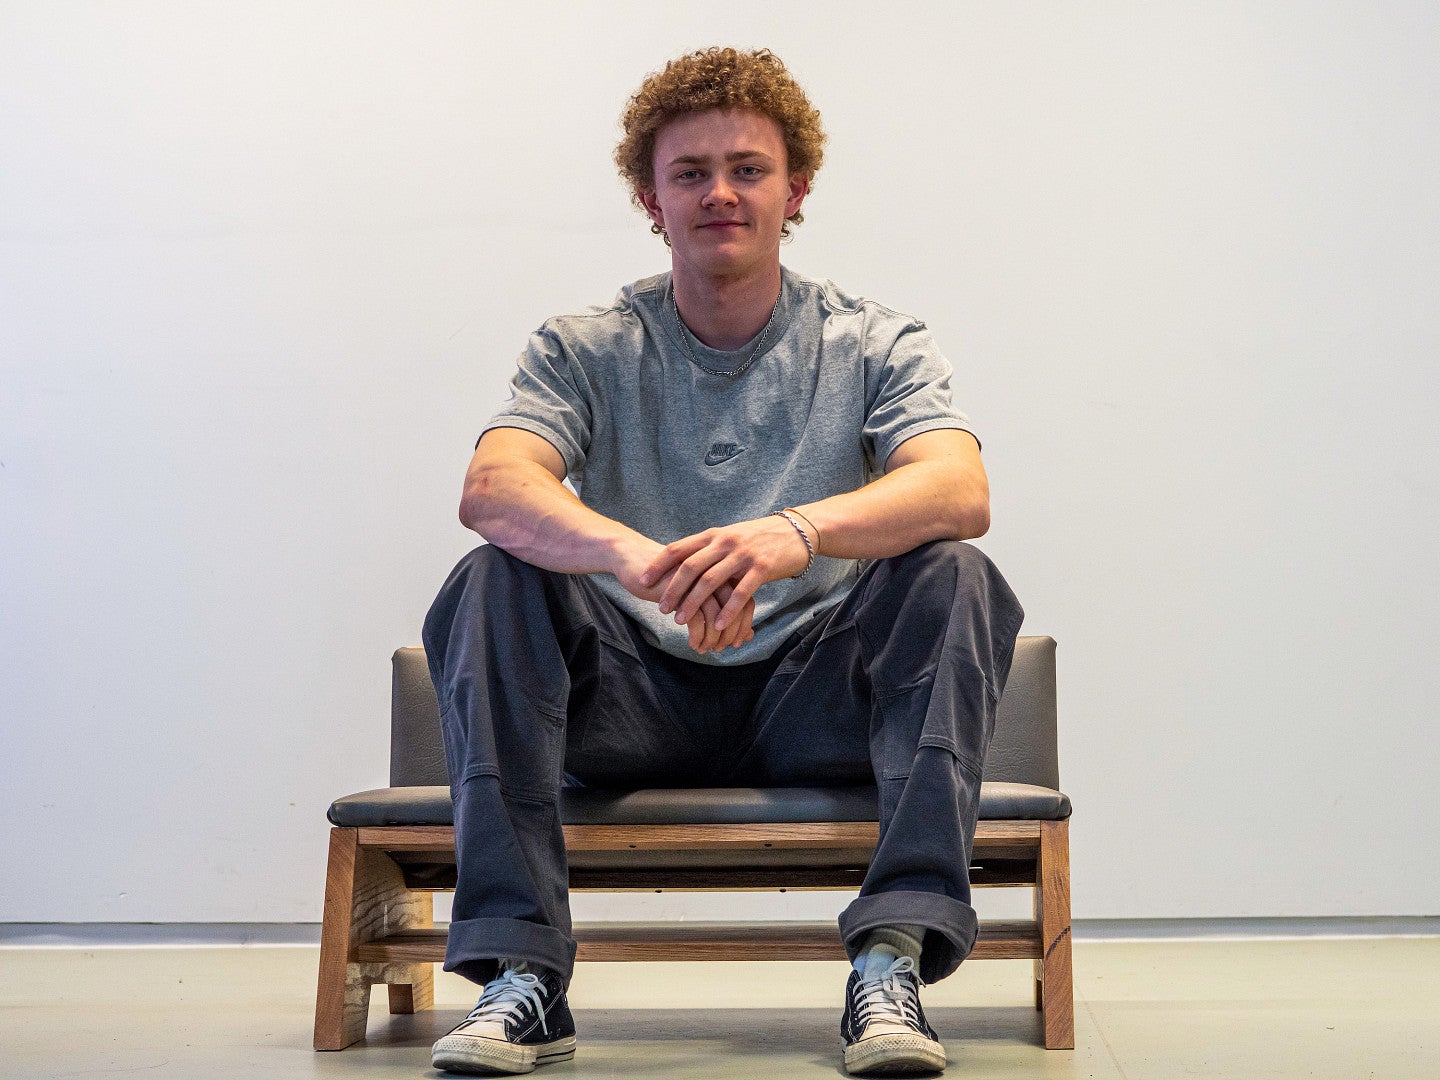 Trent sitting on a chair he designed